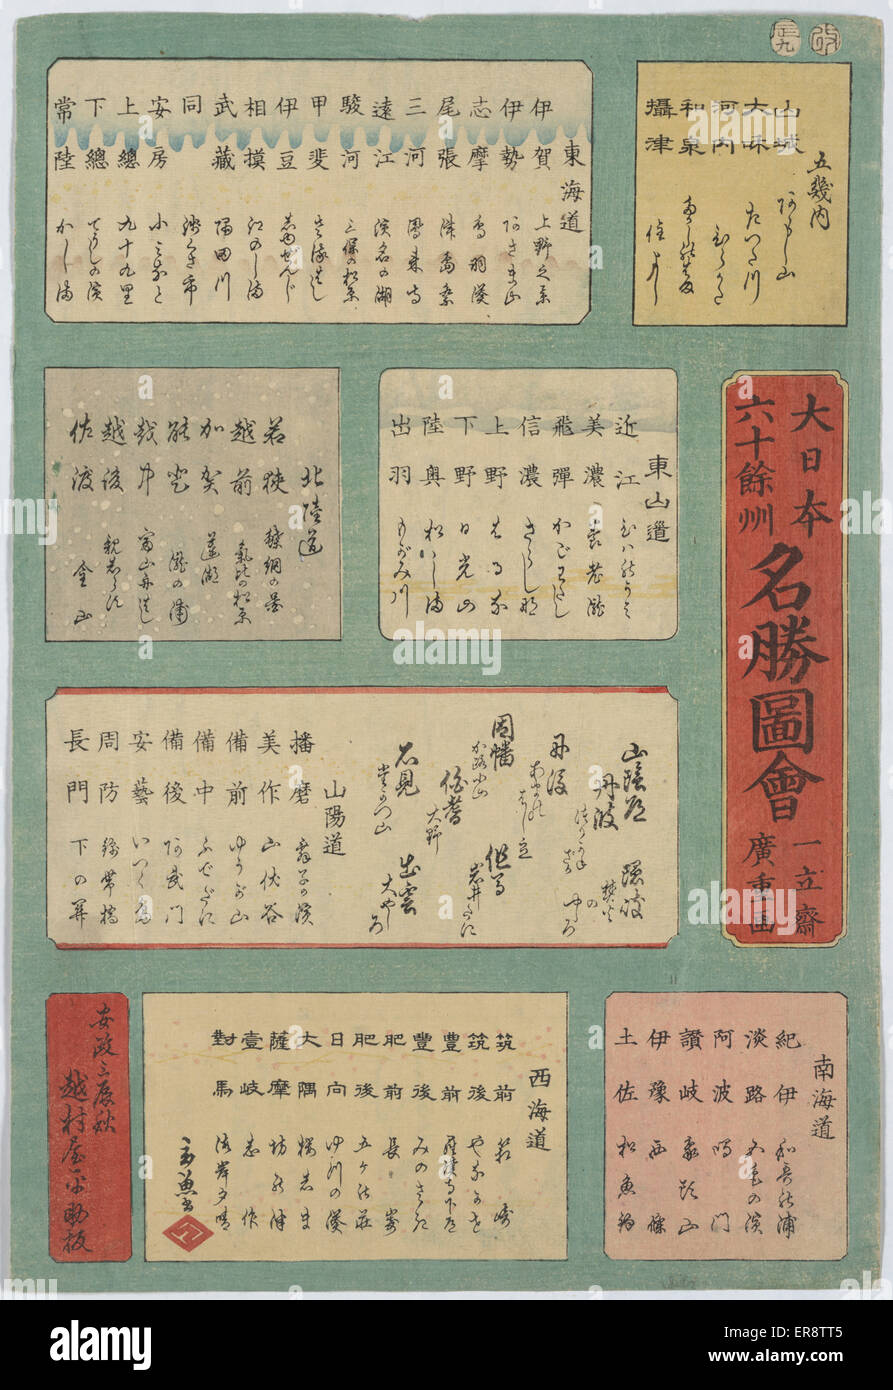 Table of contents. Print shows a table of contents page for the series of prints, Famous views in the sixty-odd provinces. The list of prints is arranged in the Provincial order of old Japan. Date 1856. Stock Photo